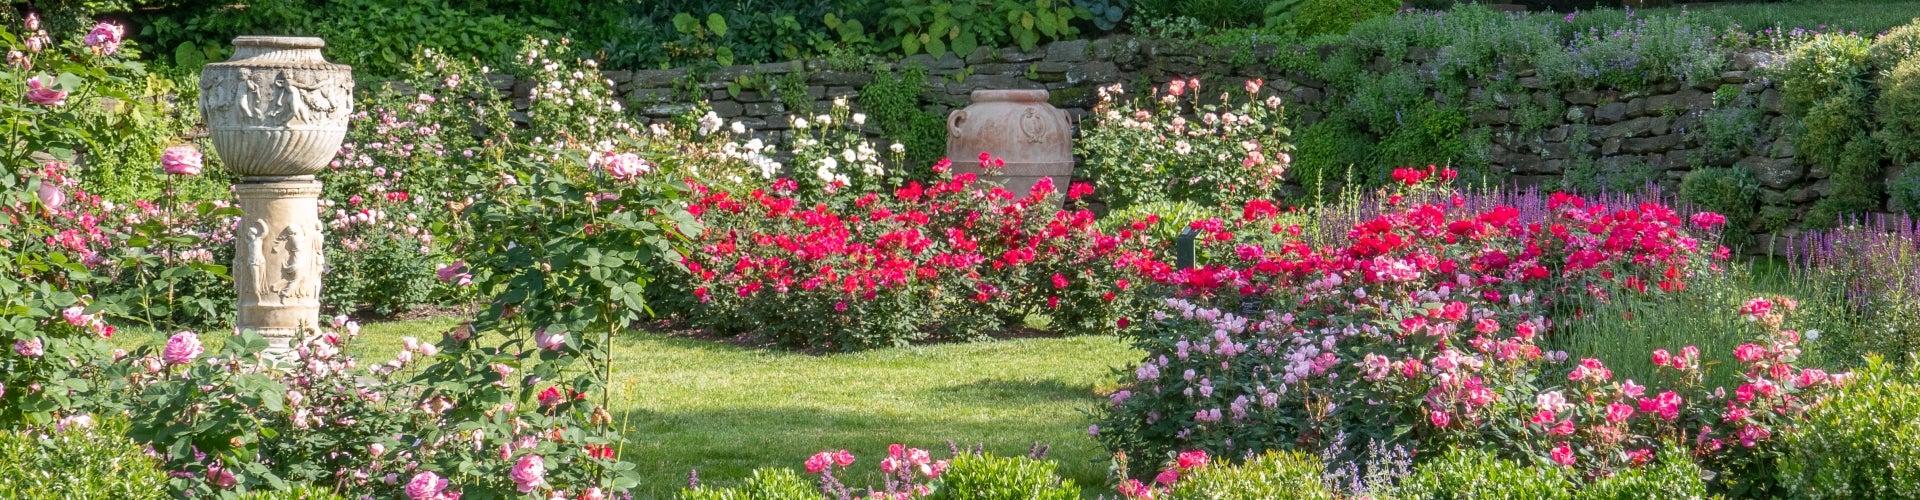 A garden in bloom with different color roses and other flowers.